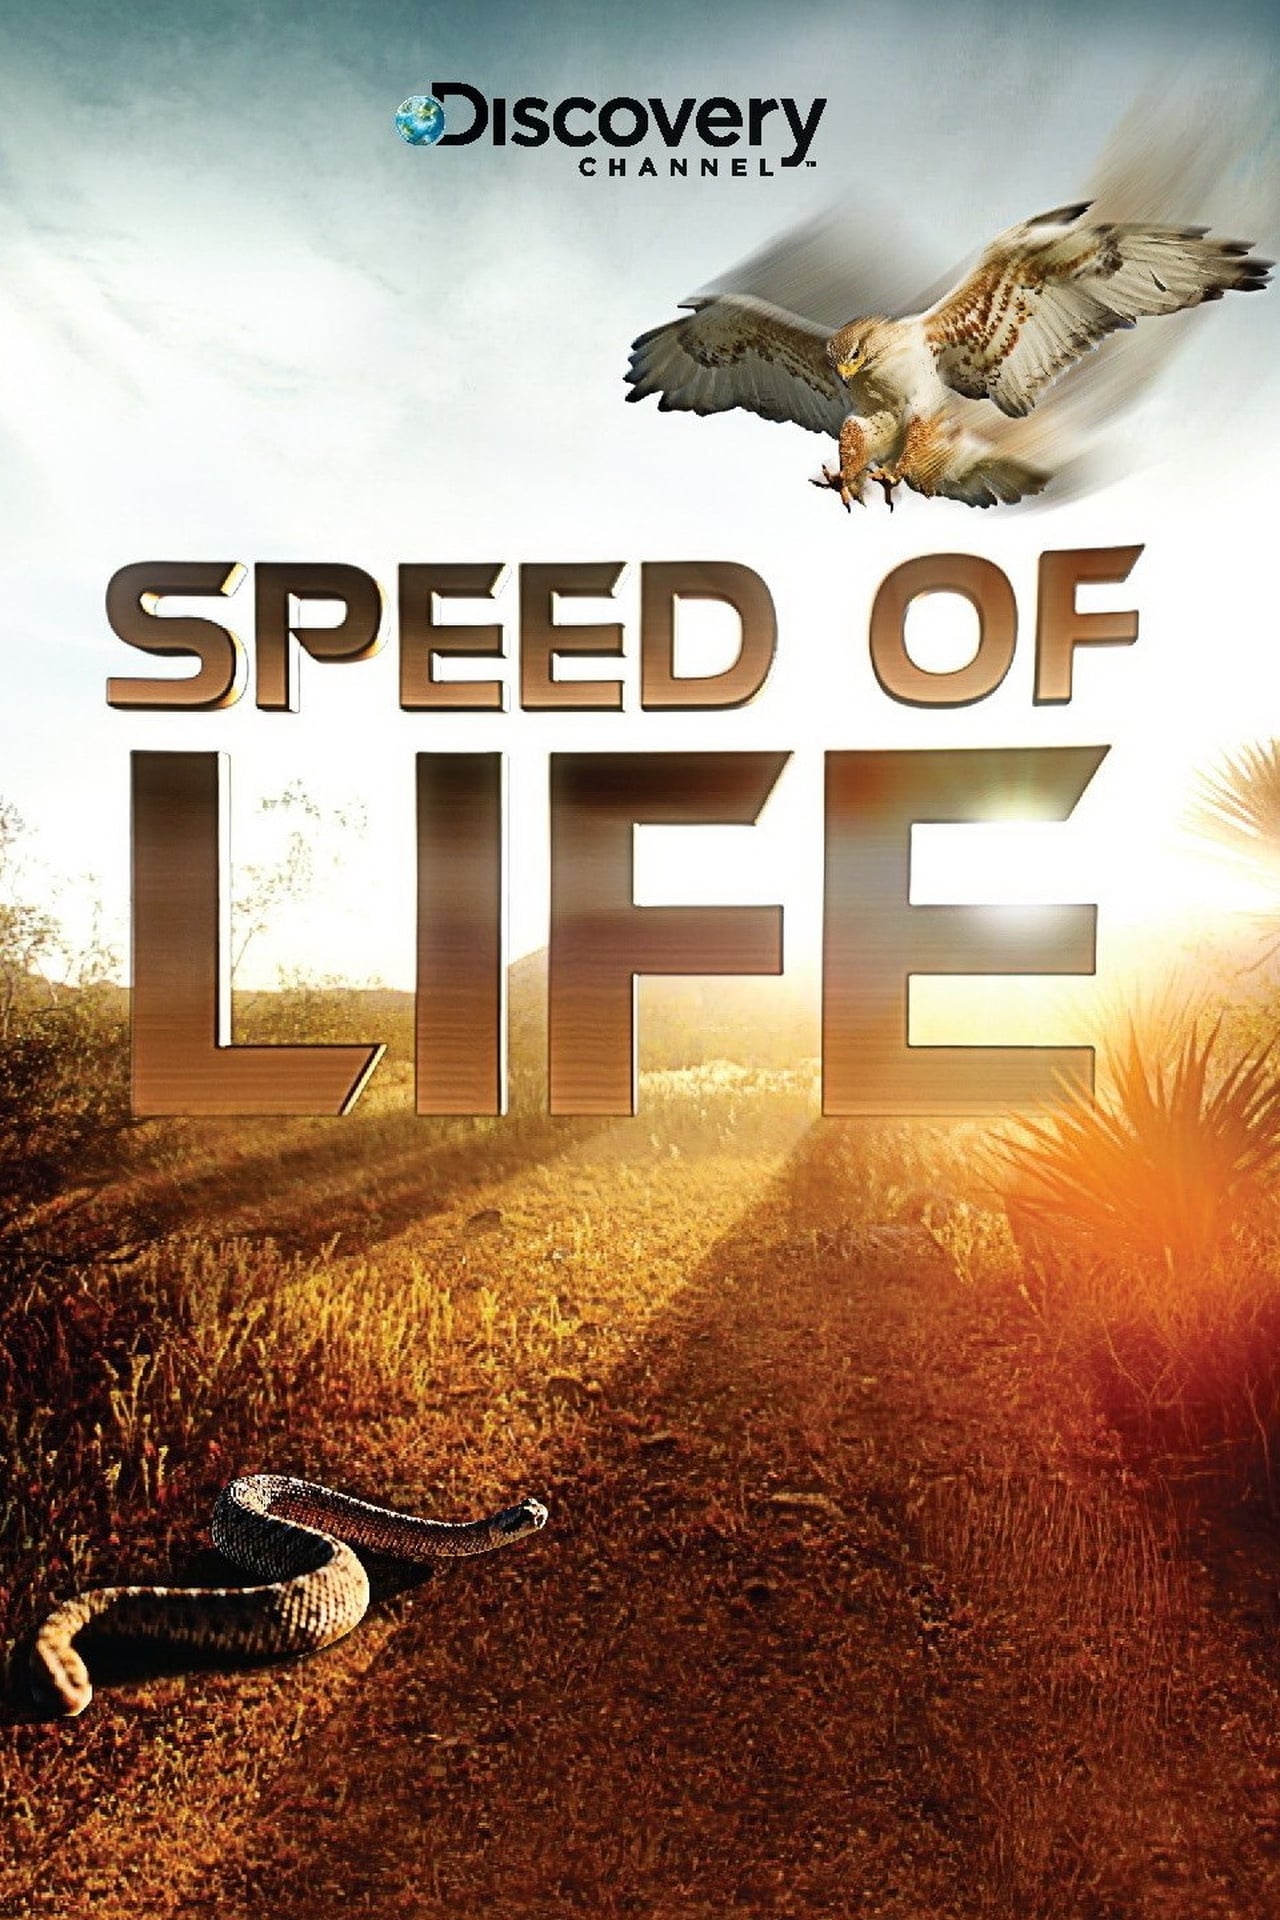 Speed of Life (2010) S1 EP1 Hunters of East Africa 448Kbps 25Fps 48Khz 2.0Ch BluRay Turkish Audio TAC